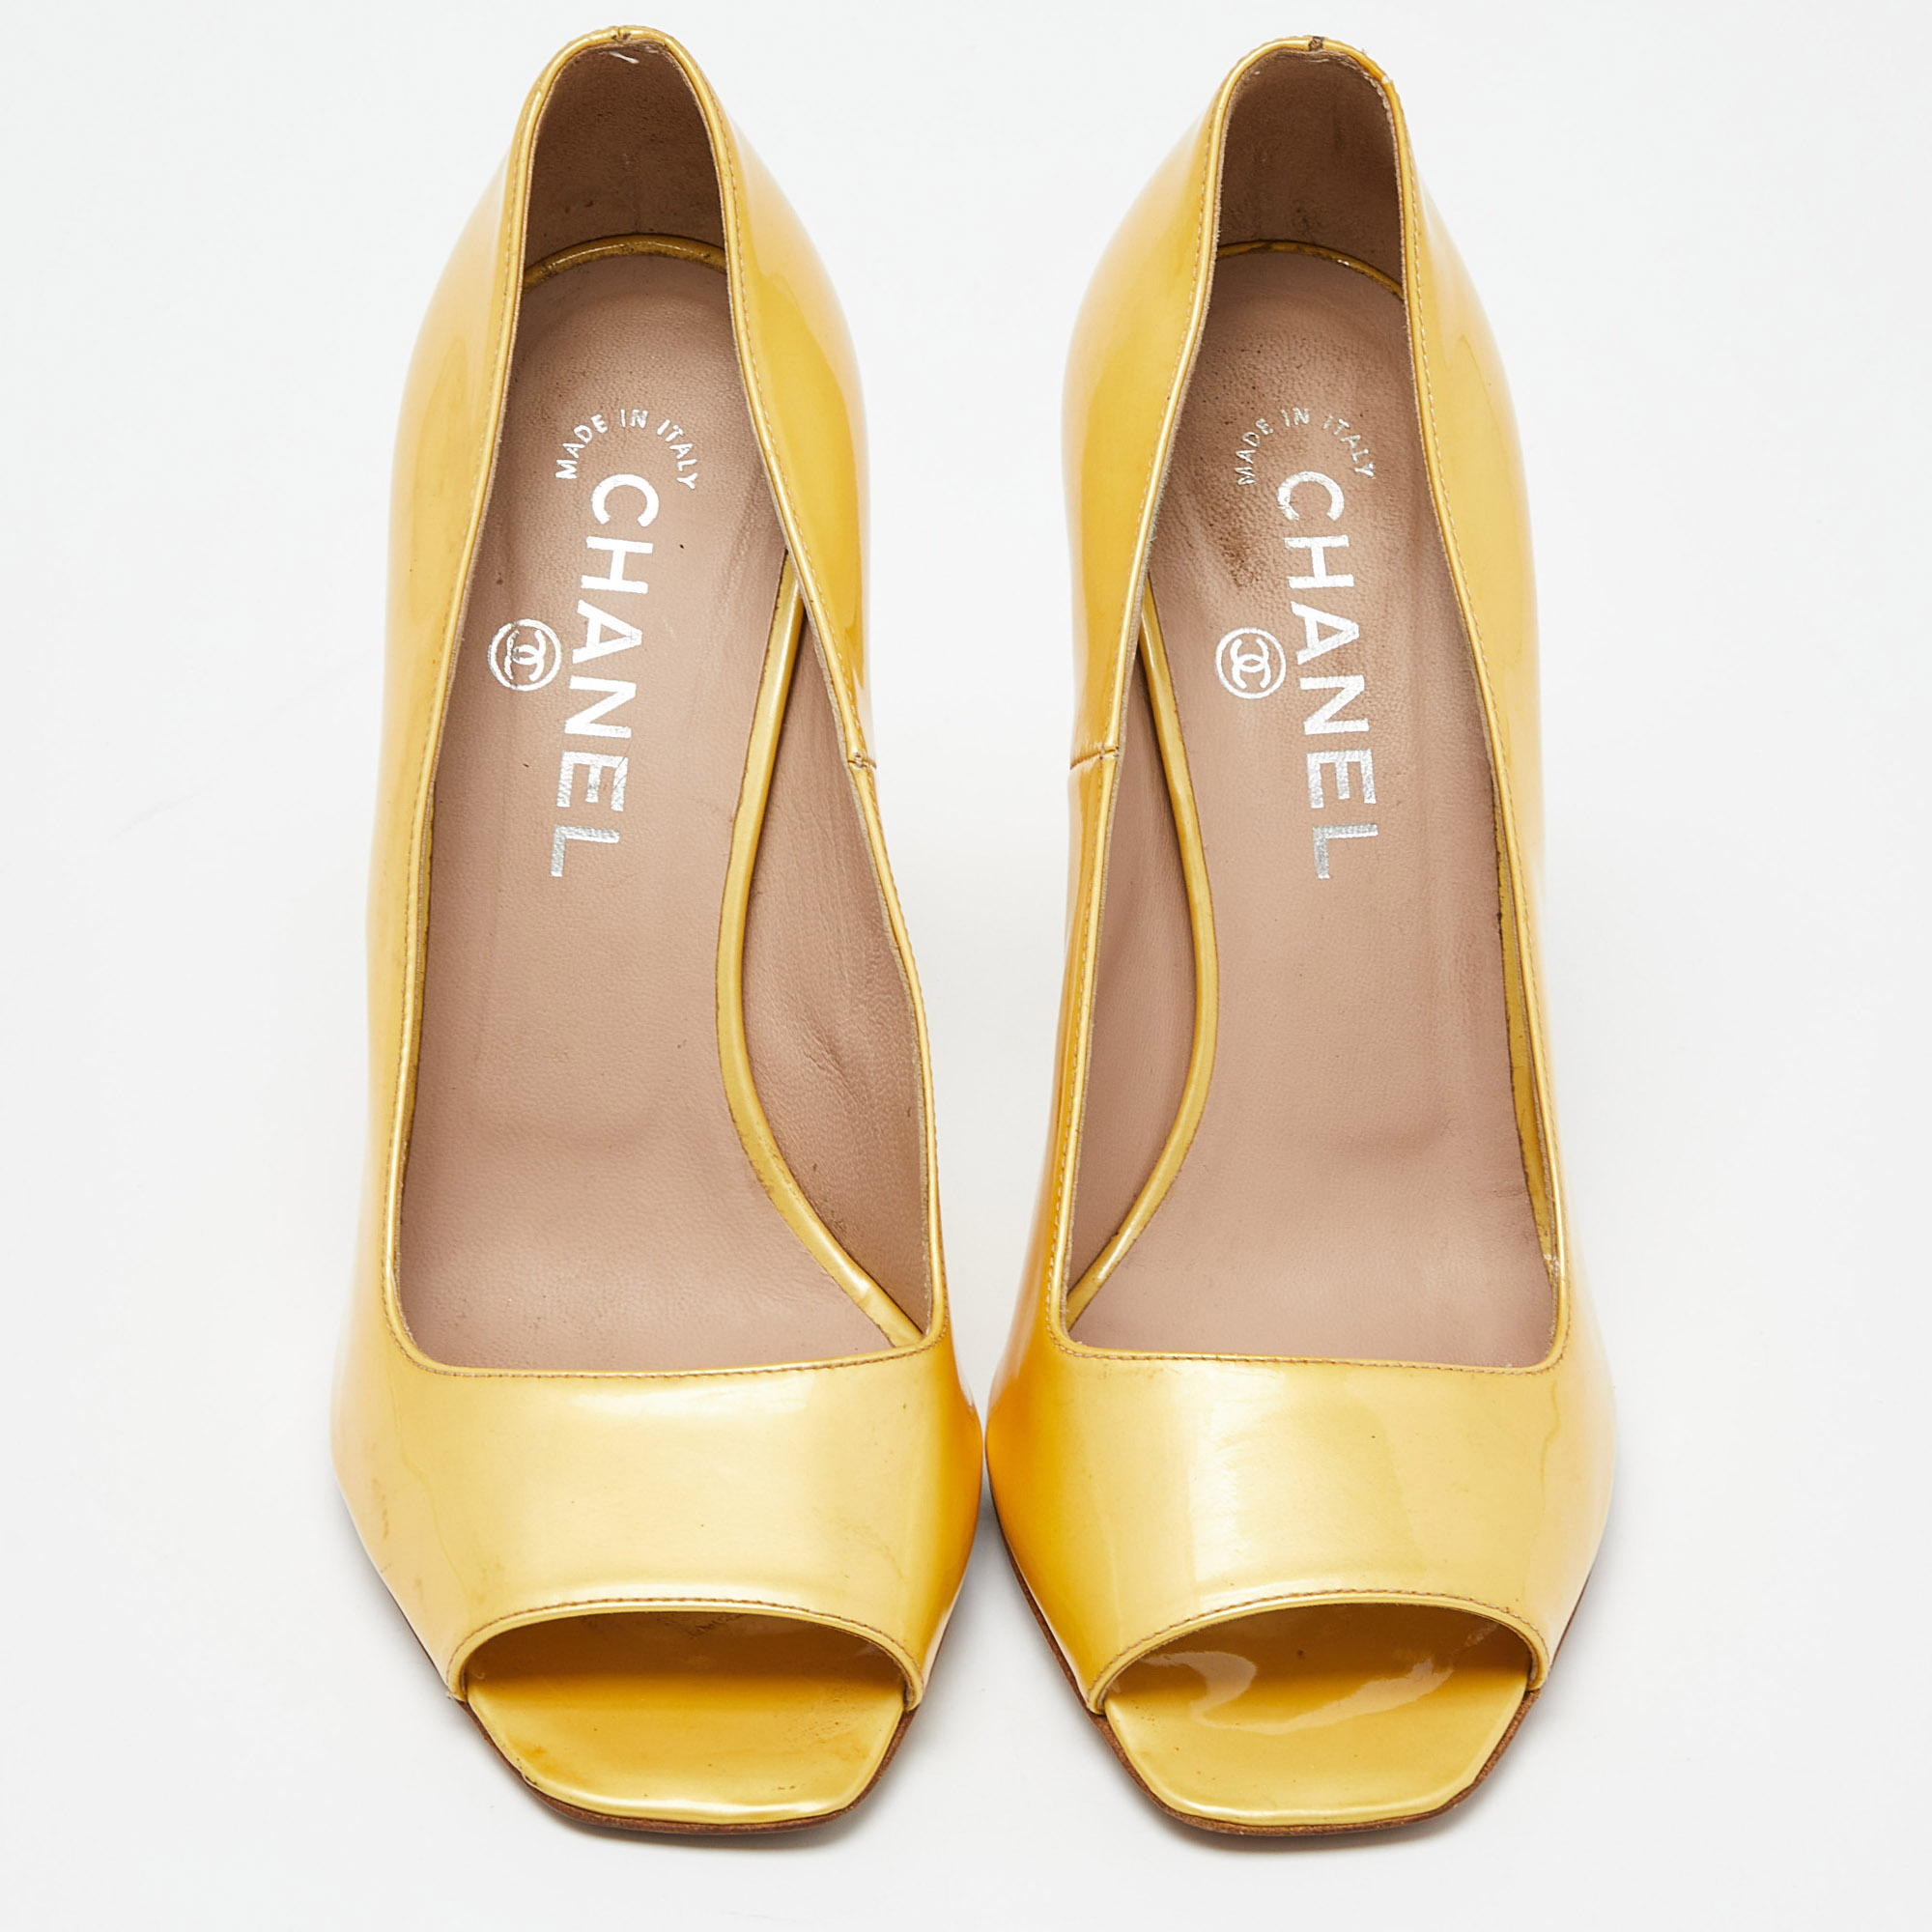 Chanel Yellow Patent Leather CC Open Toe Pumps Size 38